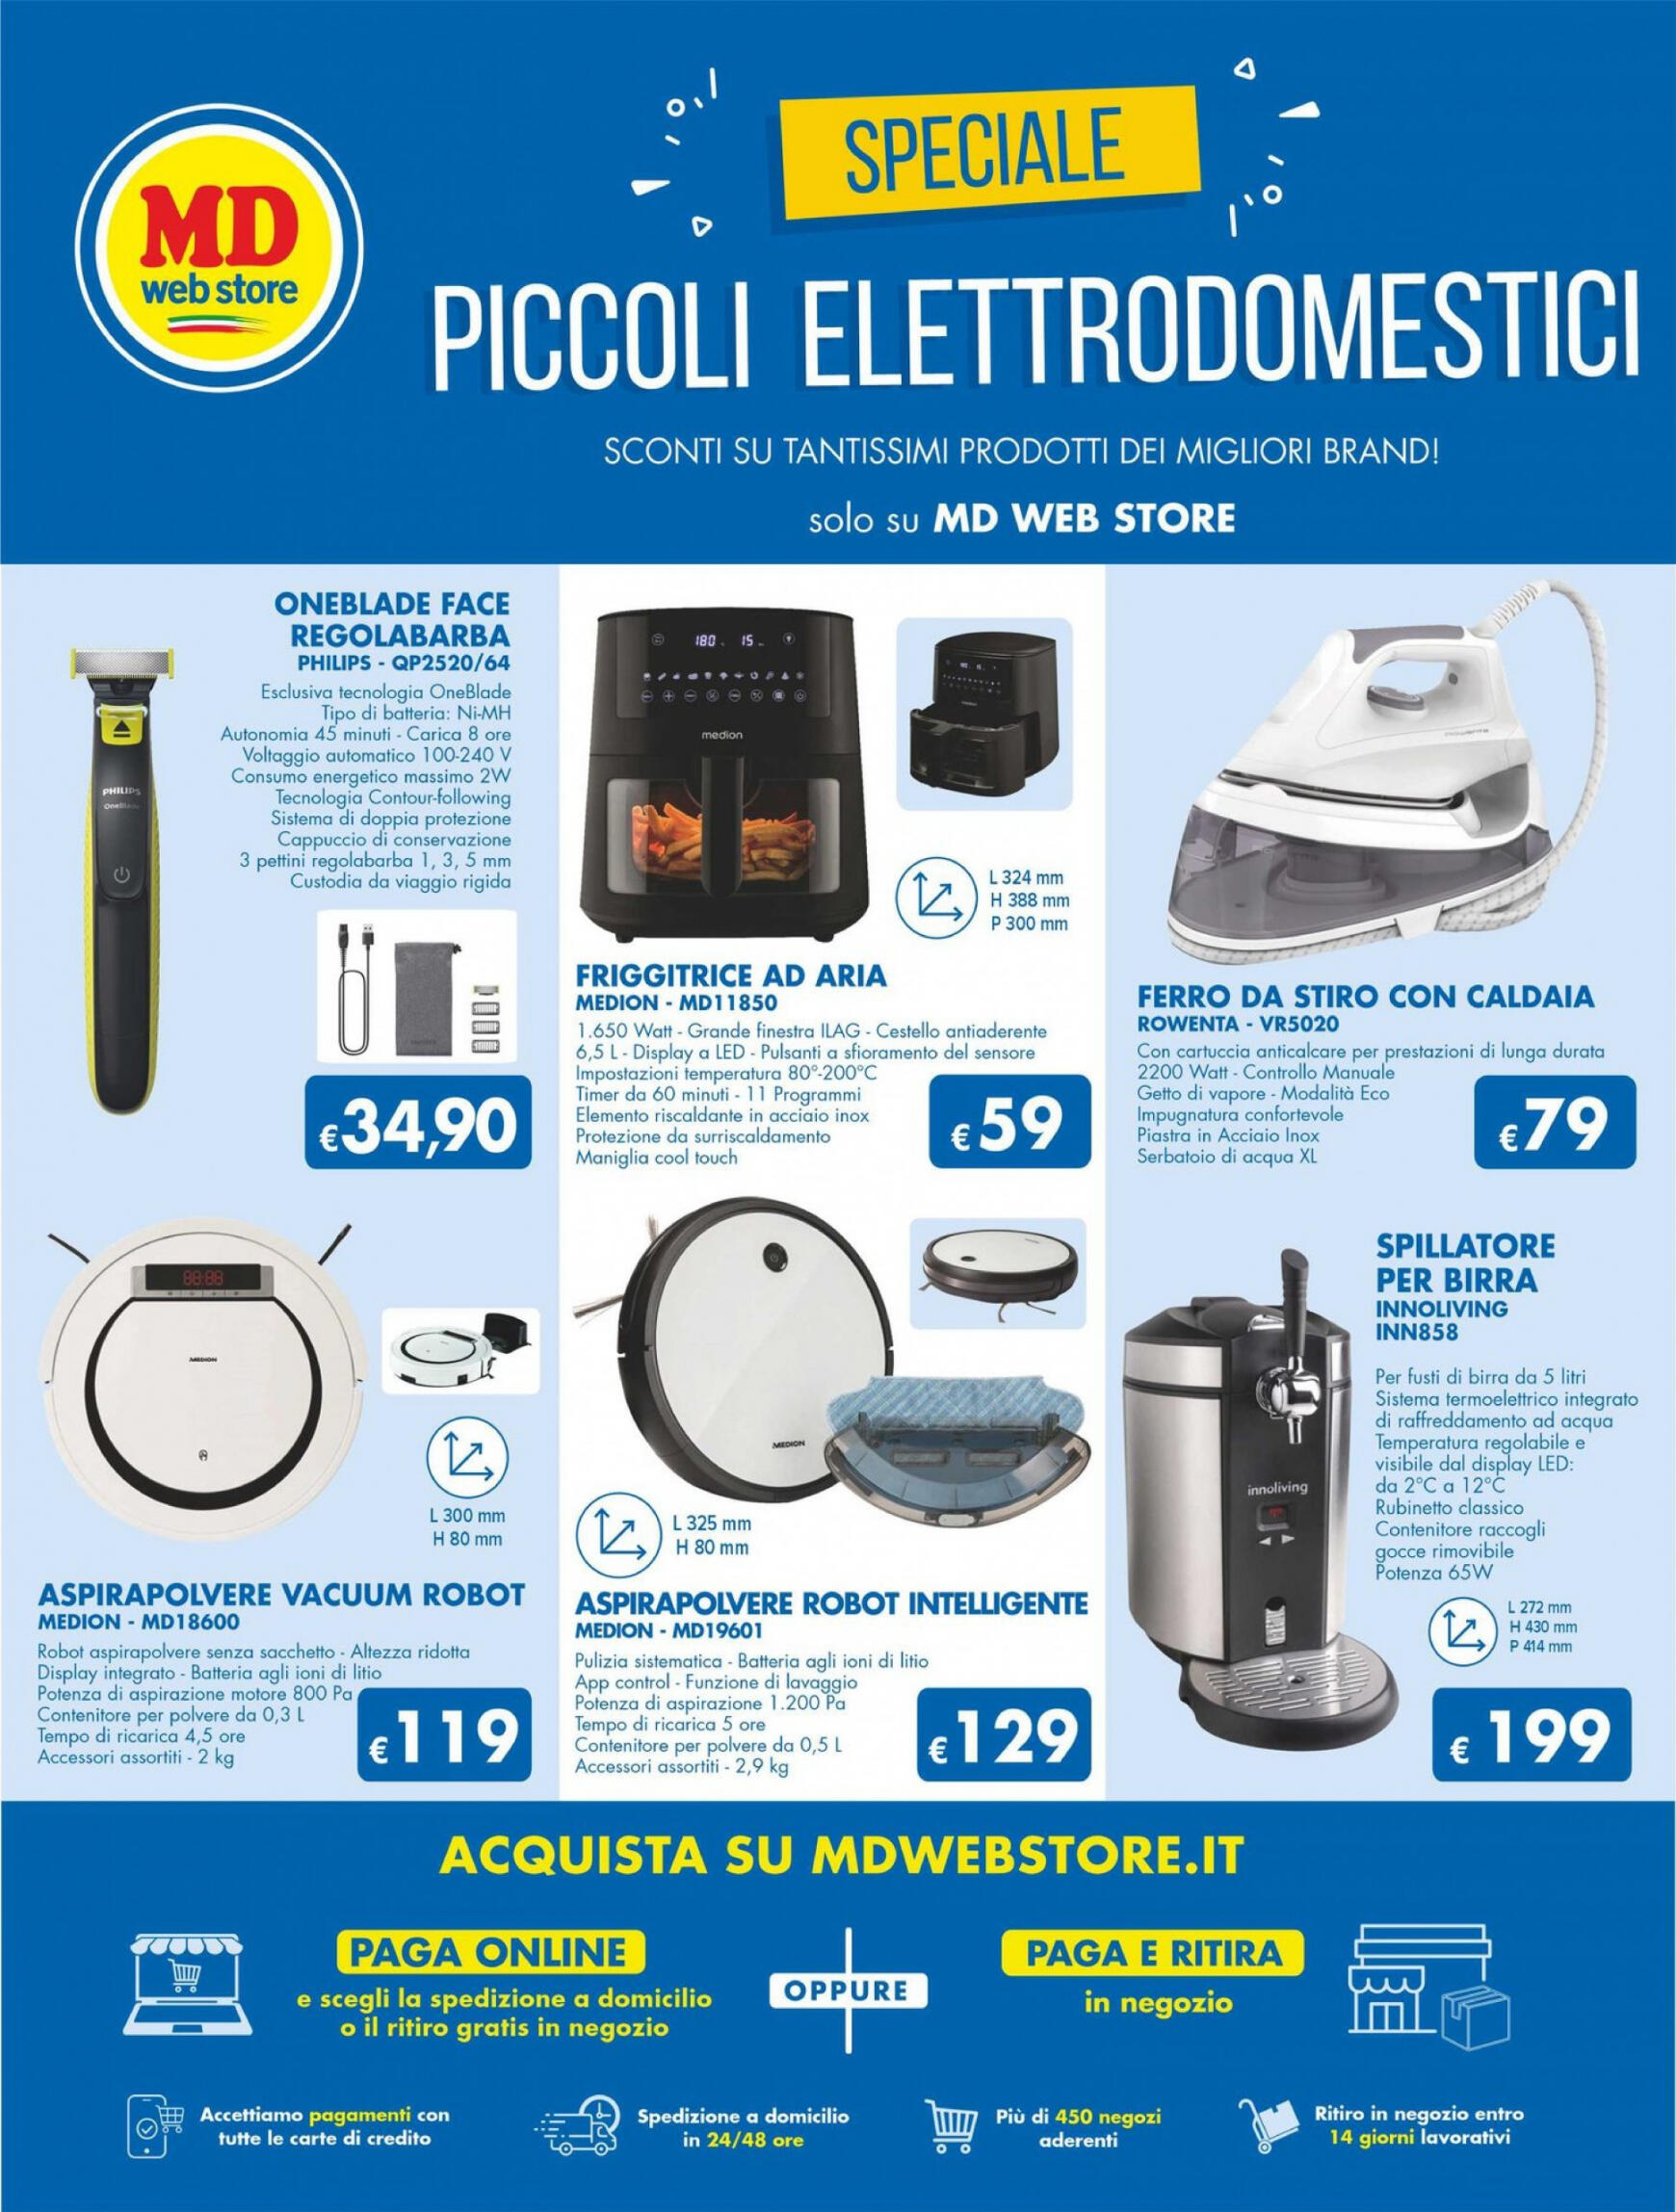 md-discount - Nuovo volantino MD 16.04. - 21.04. - page: 19